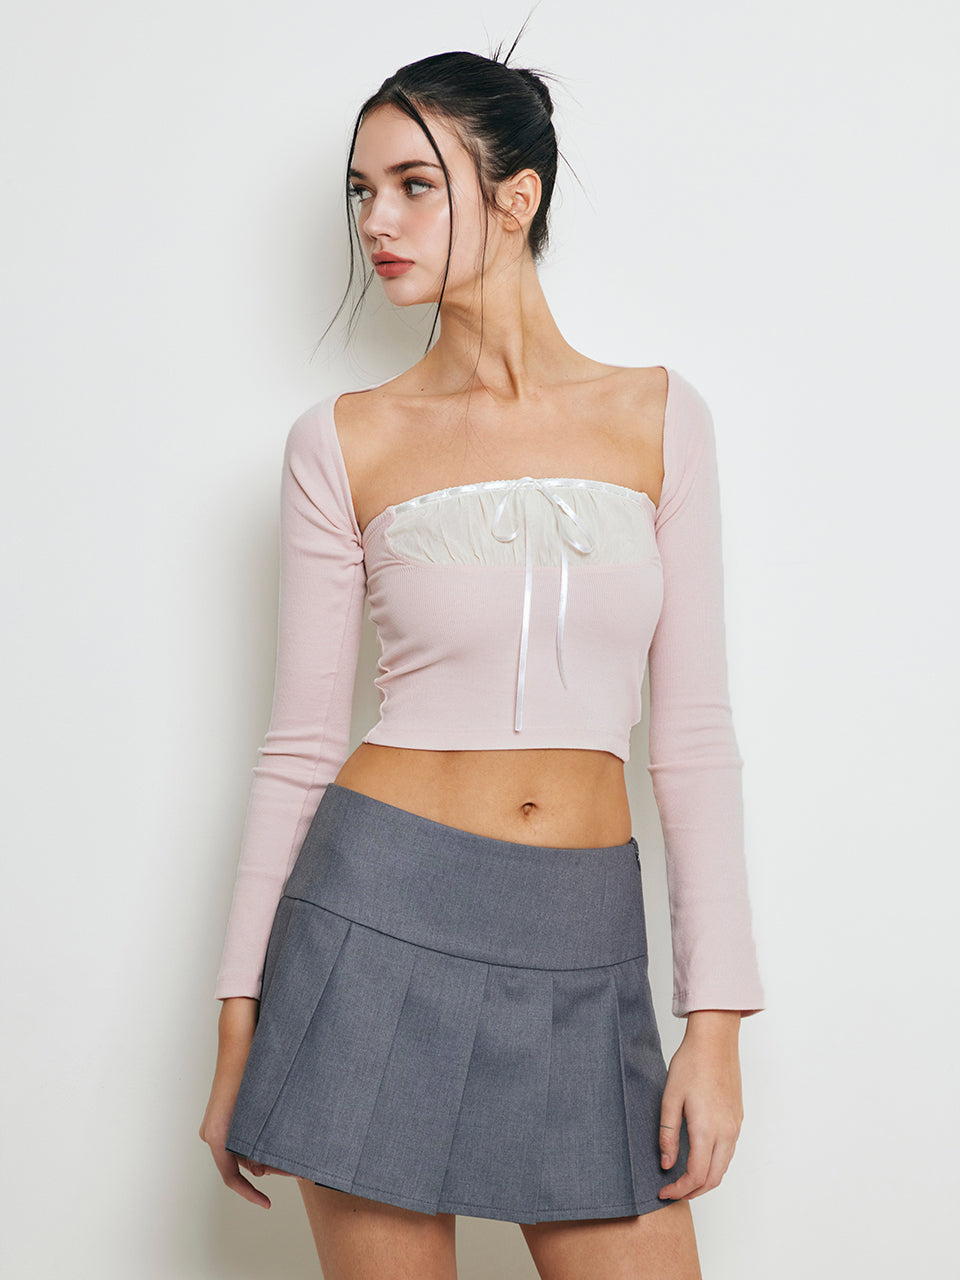 NOT YOUR ROSE SS2312 Daisy bolero set Pink – Lines Up